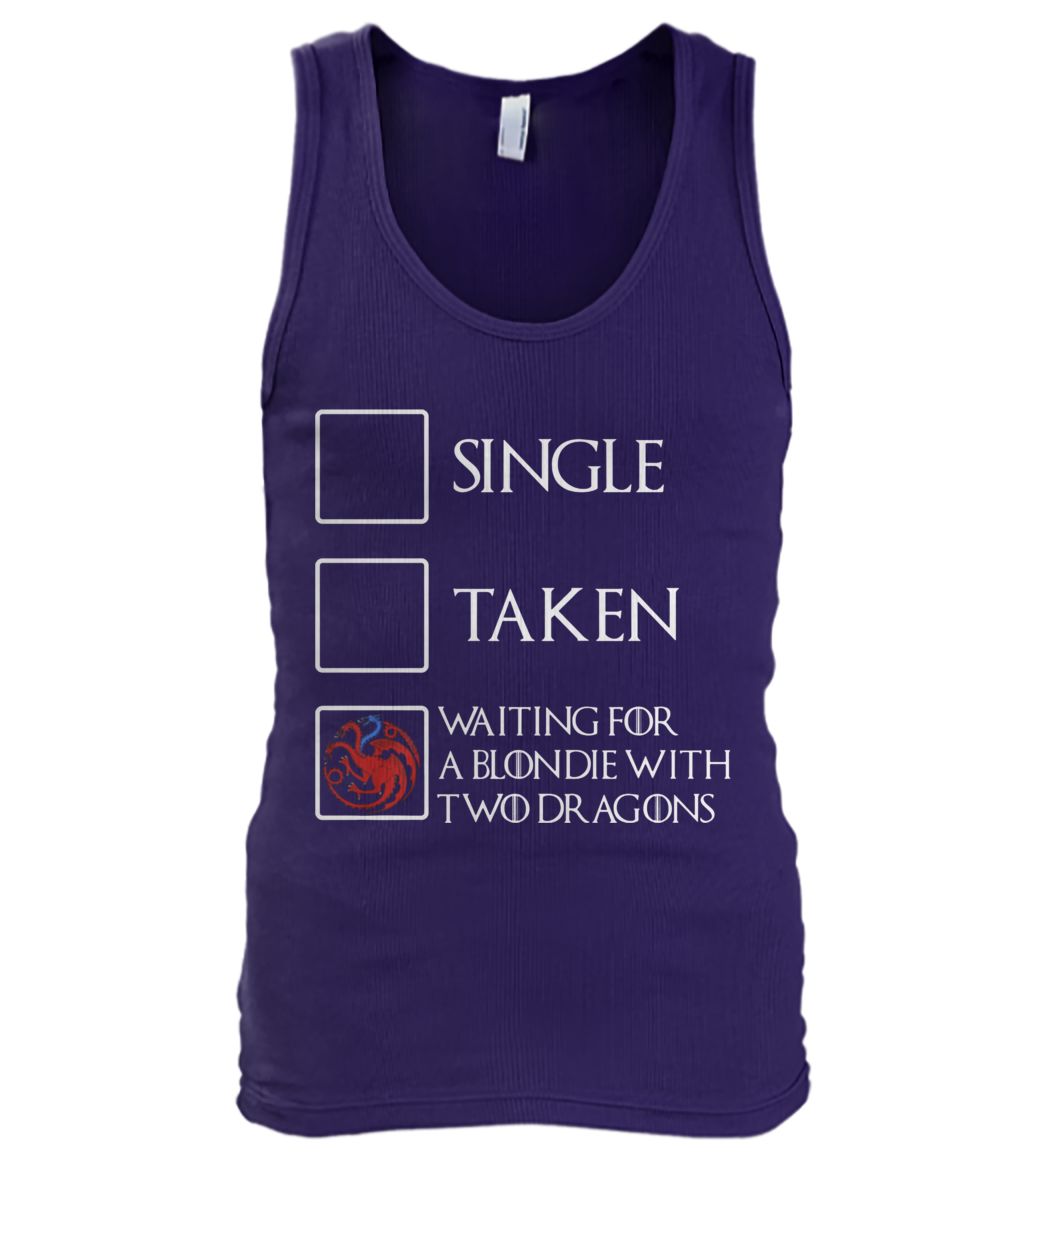 Game of thrones single taken waiting for a blondie with two dragons men's tank top